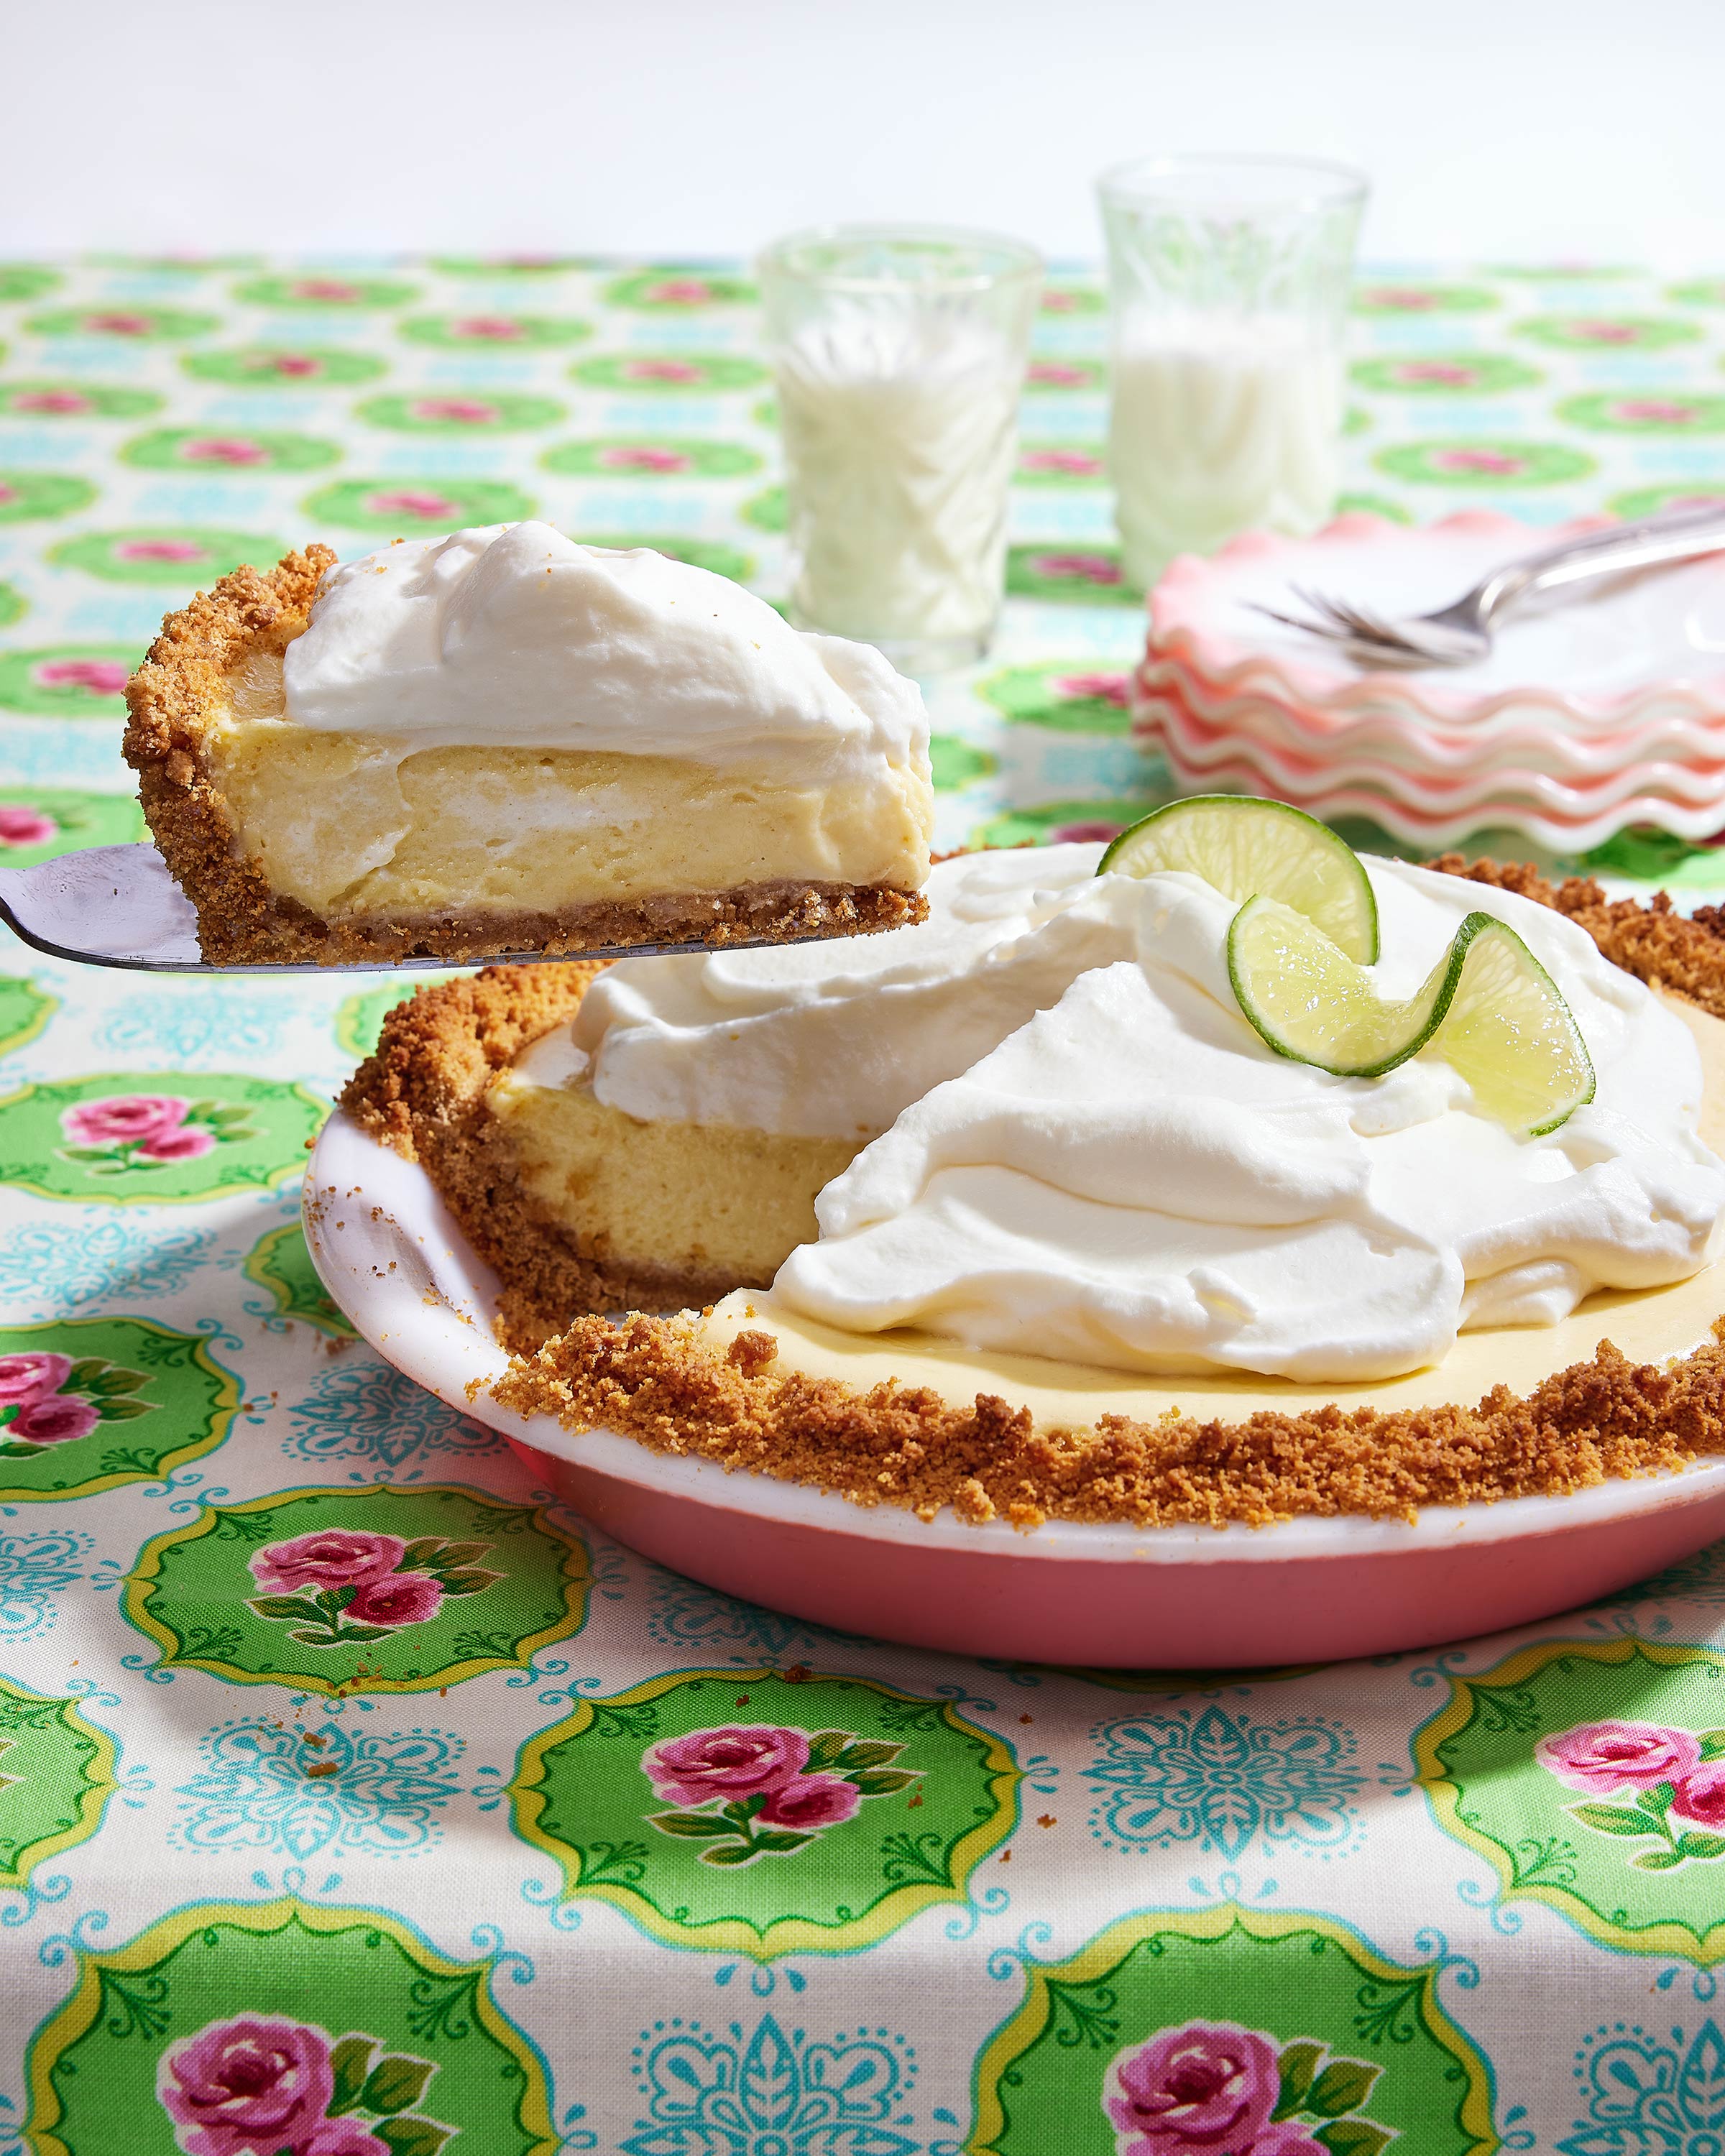 Glanger Food Photography | Key Lime Pie 